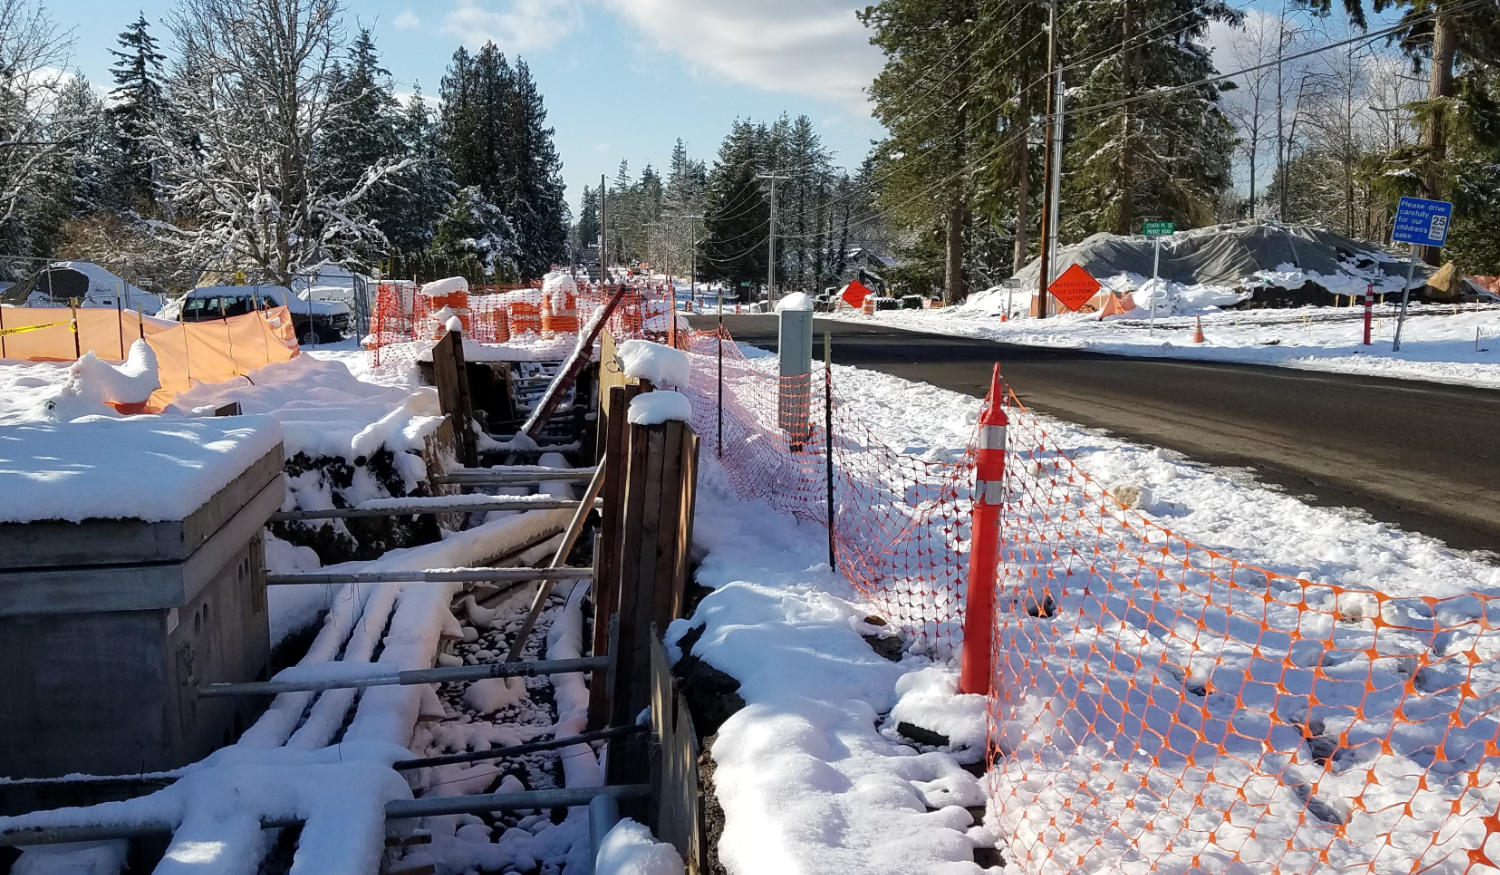 snow day at the construction site, showing a couple inches of melting snow in the trench beside a clear road